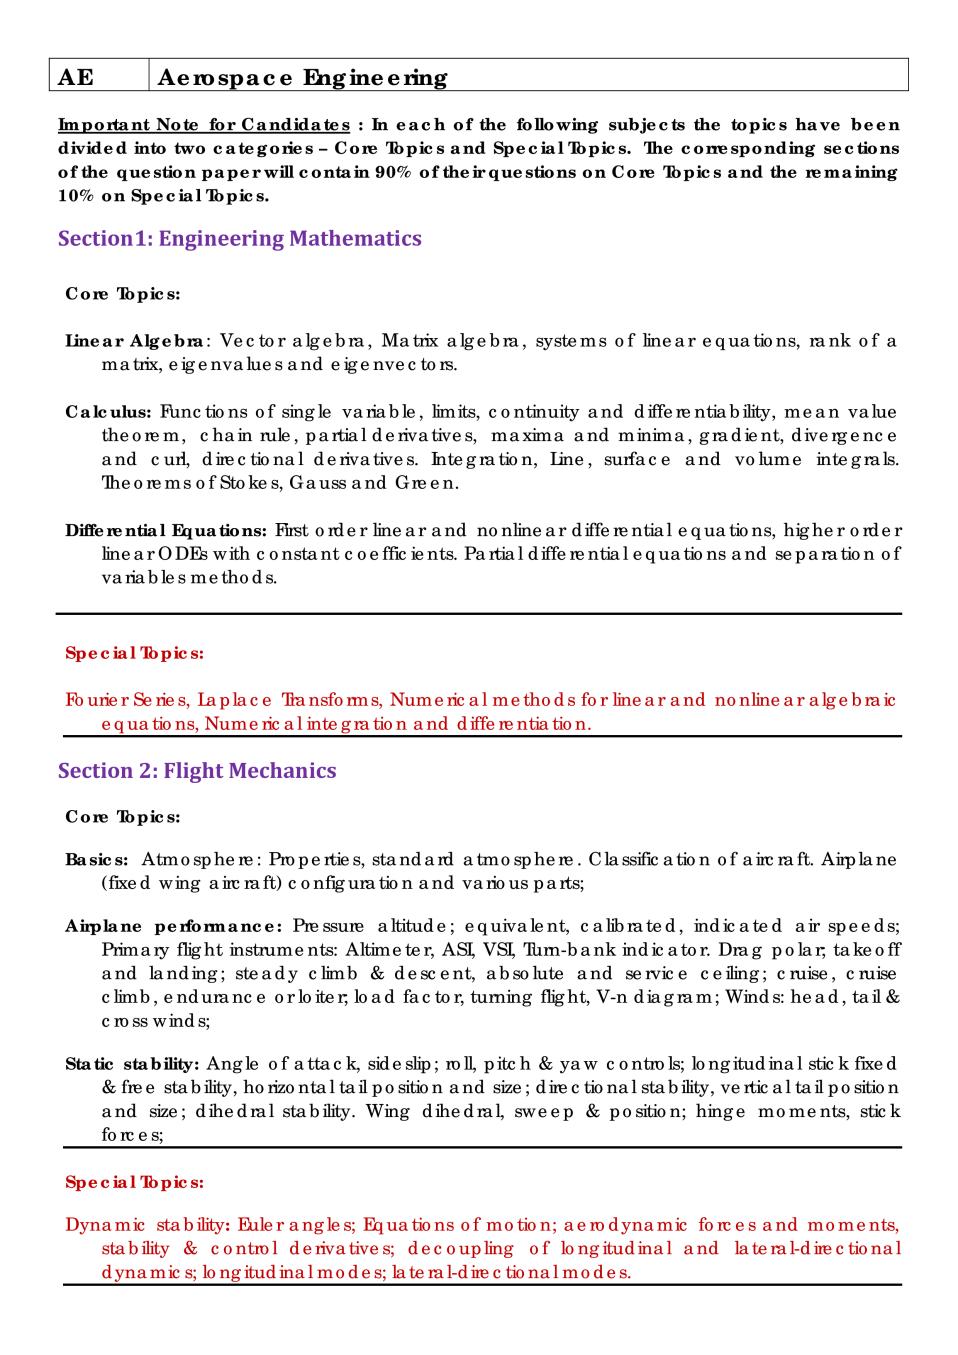 GATE 2020 Syllabus for Aerospace Engineering (AE) - Page 1